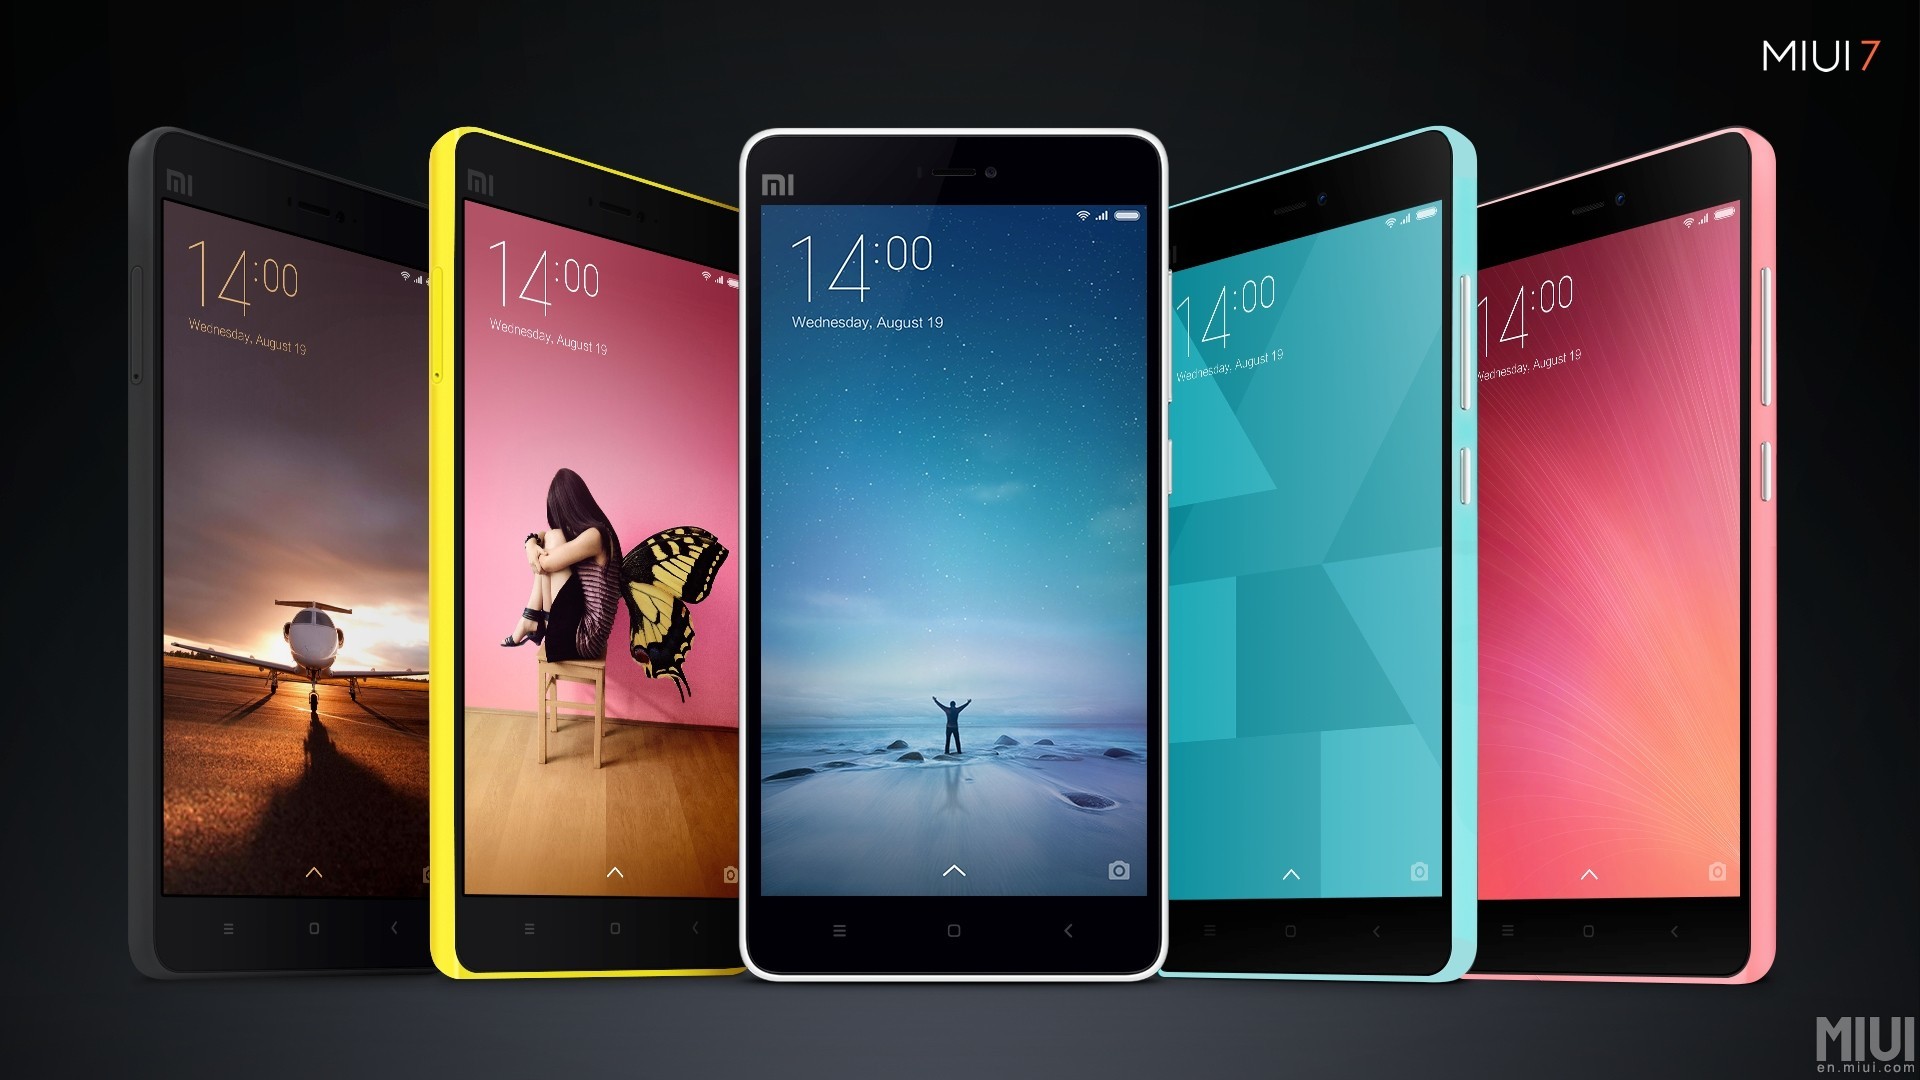 1920x1080 Meet the four new themes of MIUI 7